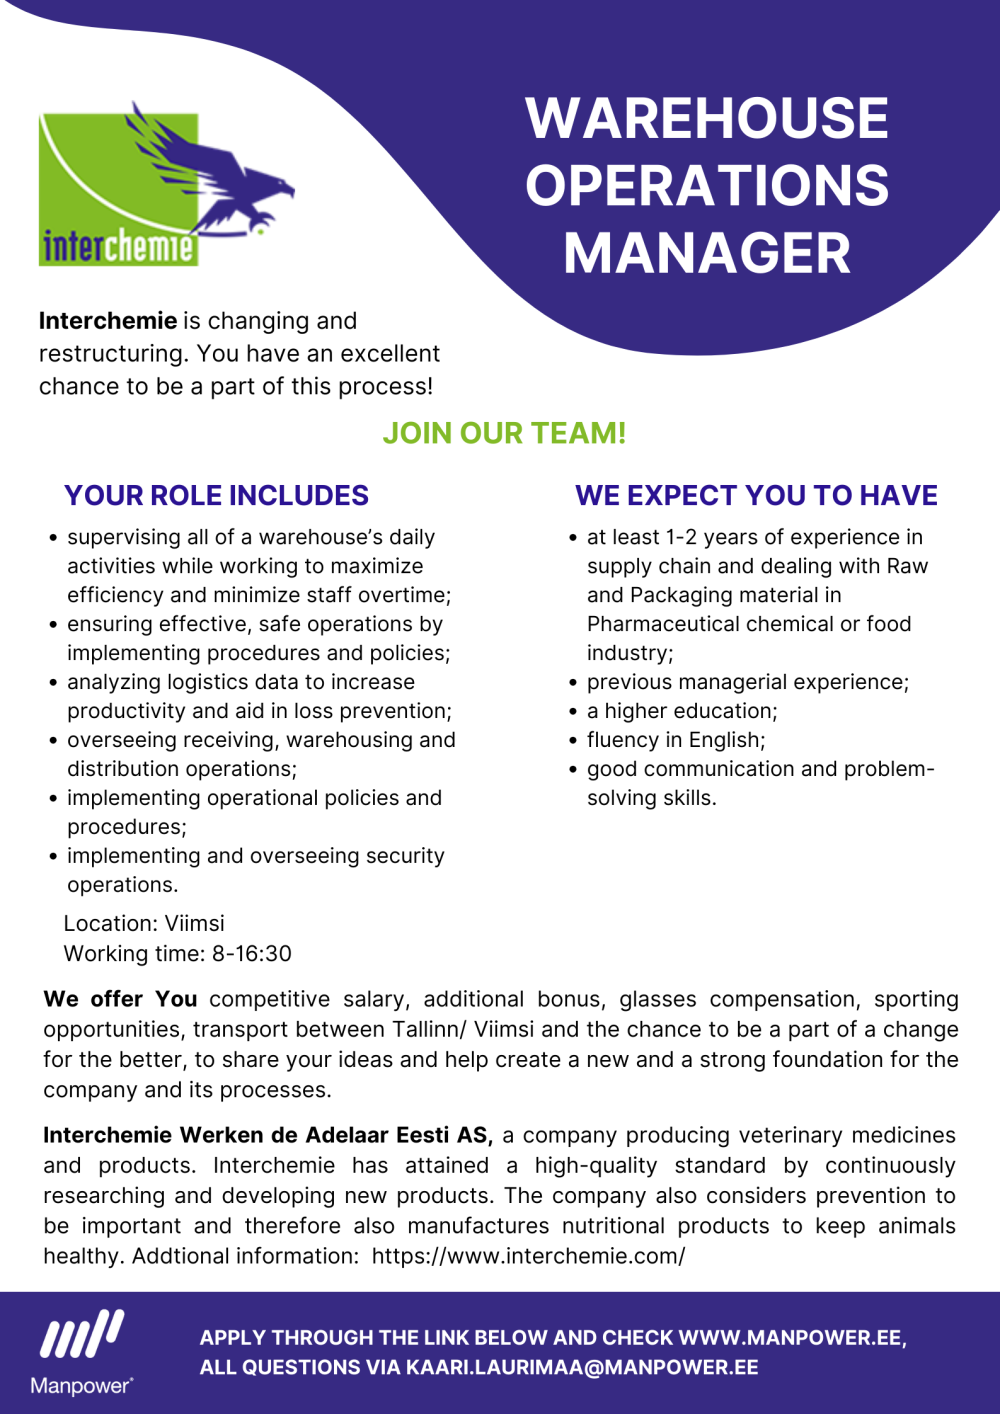 WAREHOUSE OPERATIONS MANAGER